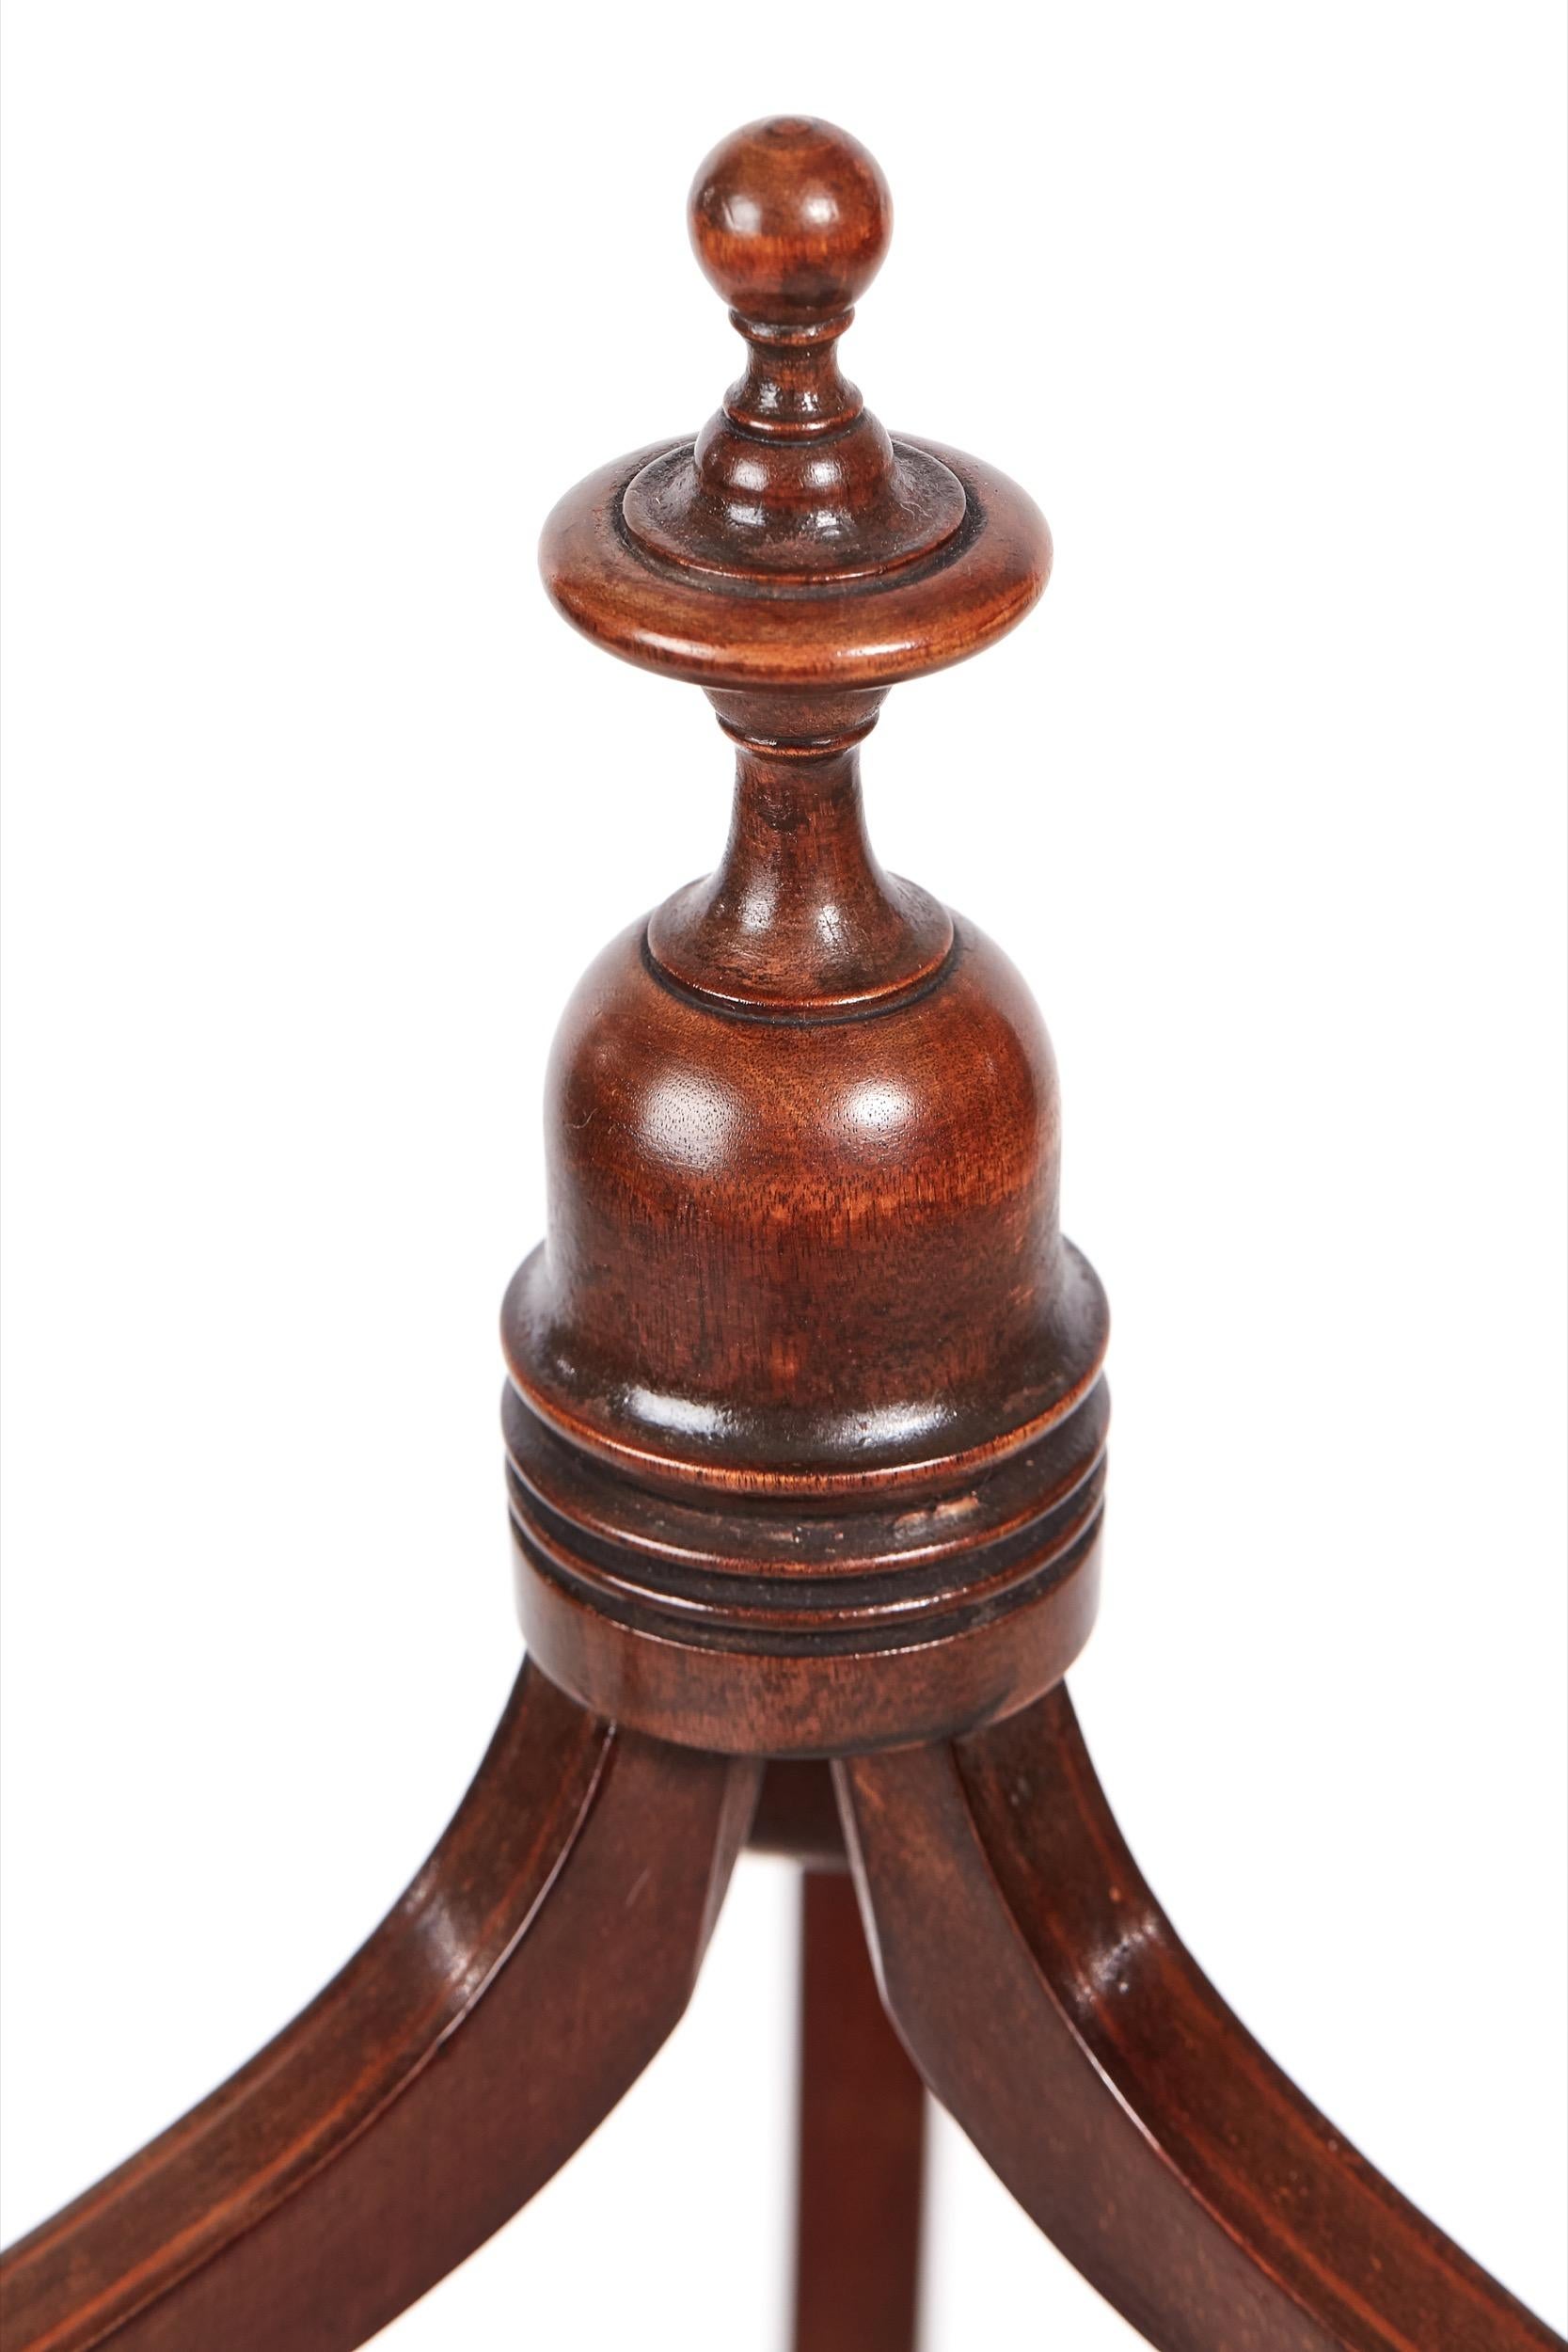 Edwardian mahogany inlaid three-tier cake stand, having a shaped turned finial to the top, three shaped shelves with satinwood inlay, standing on three shaped legs with satinwood inlay
Lovely color and condition
Measures: 12